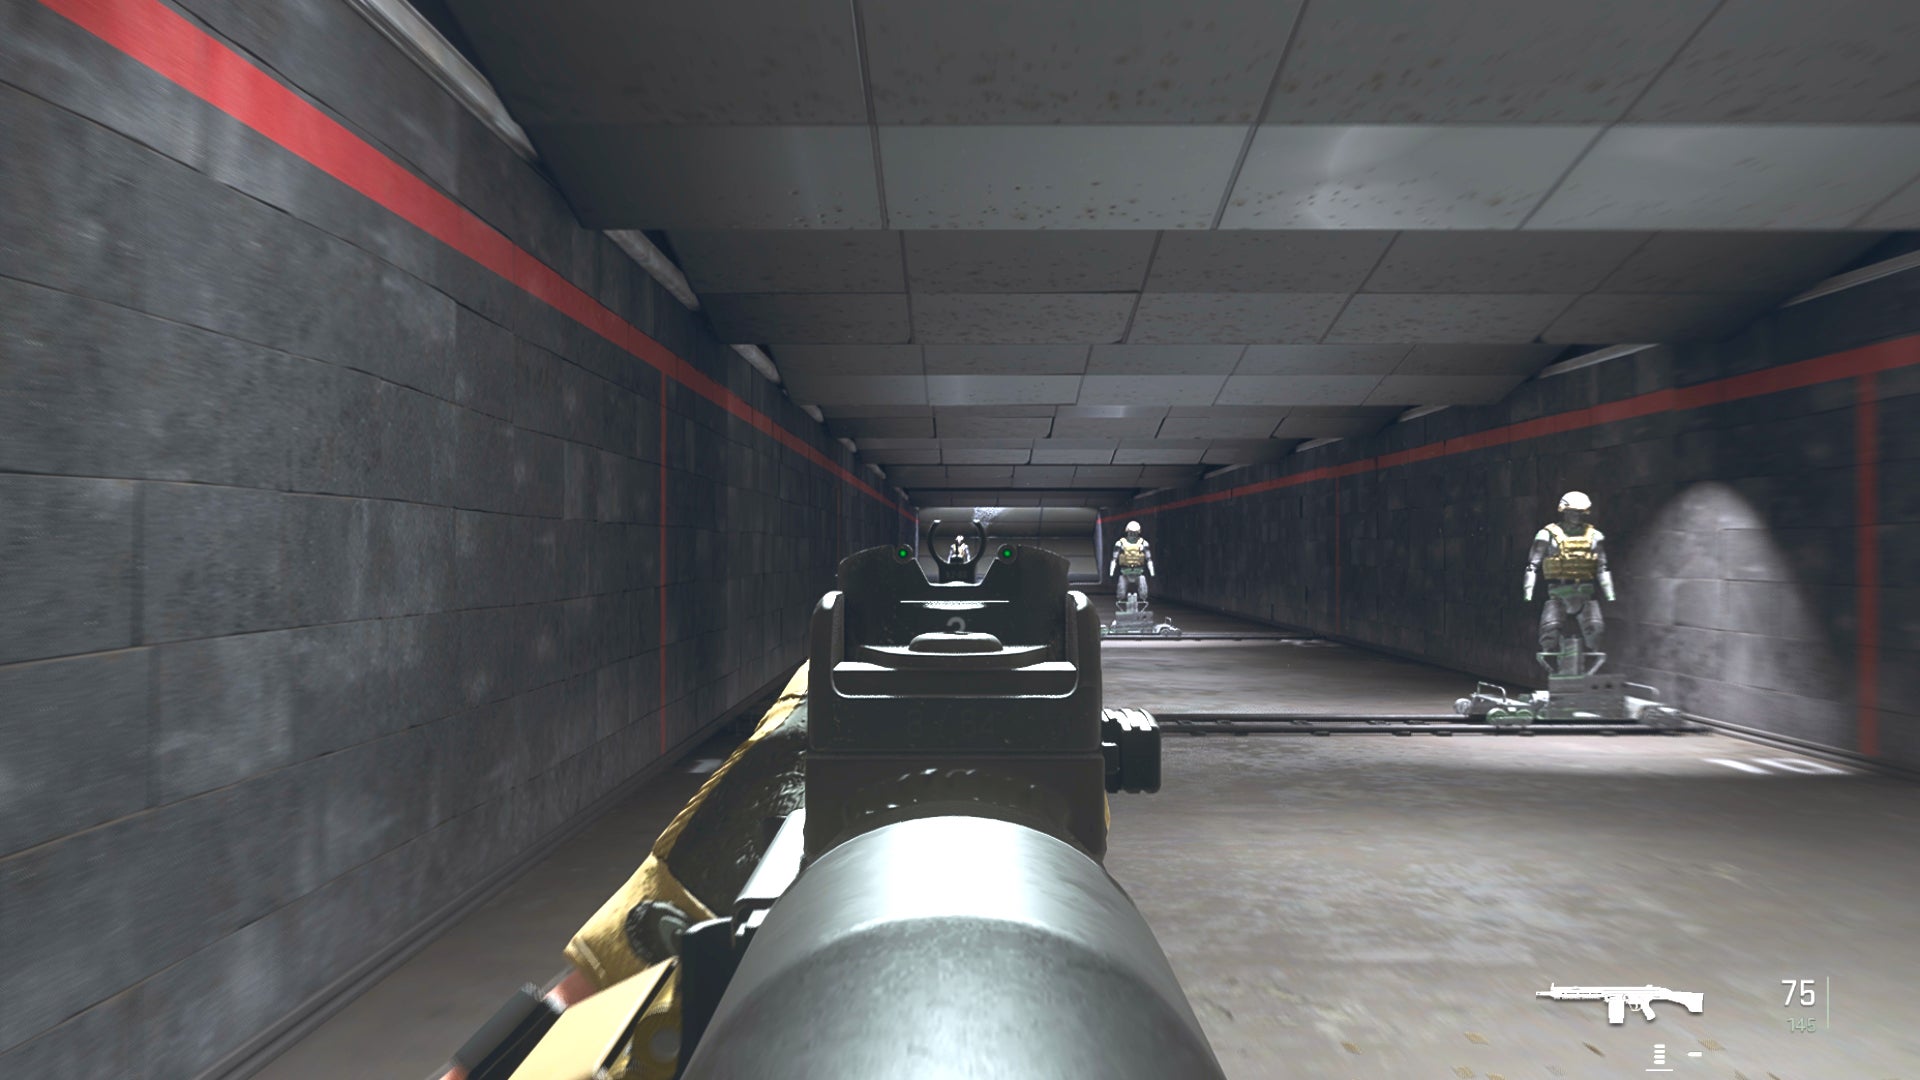 The player in Warzone 2.0 aims at a training dummy with the Rapp H ironsights.